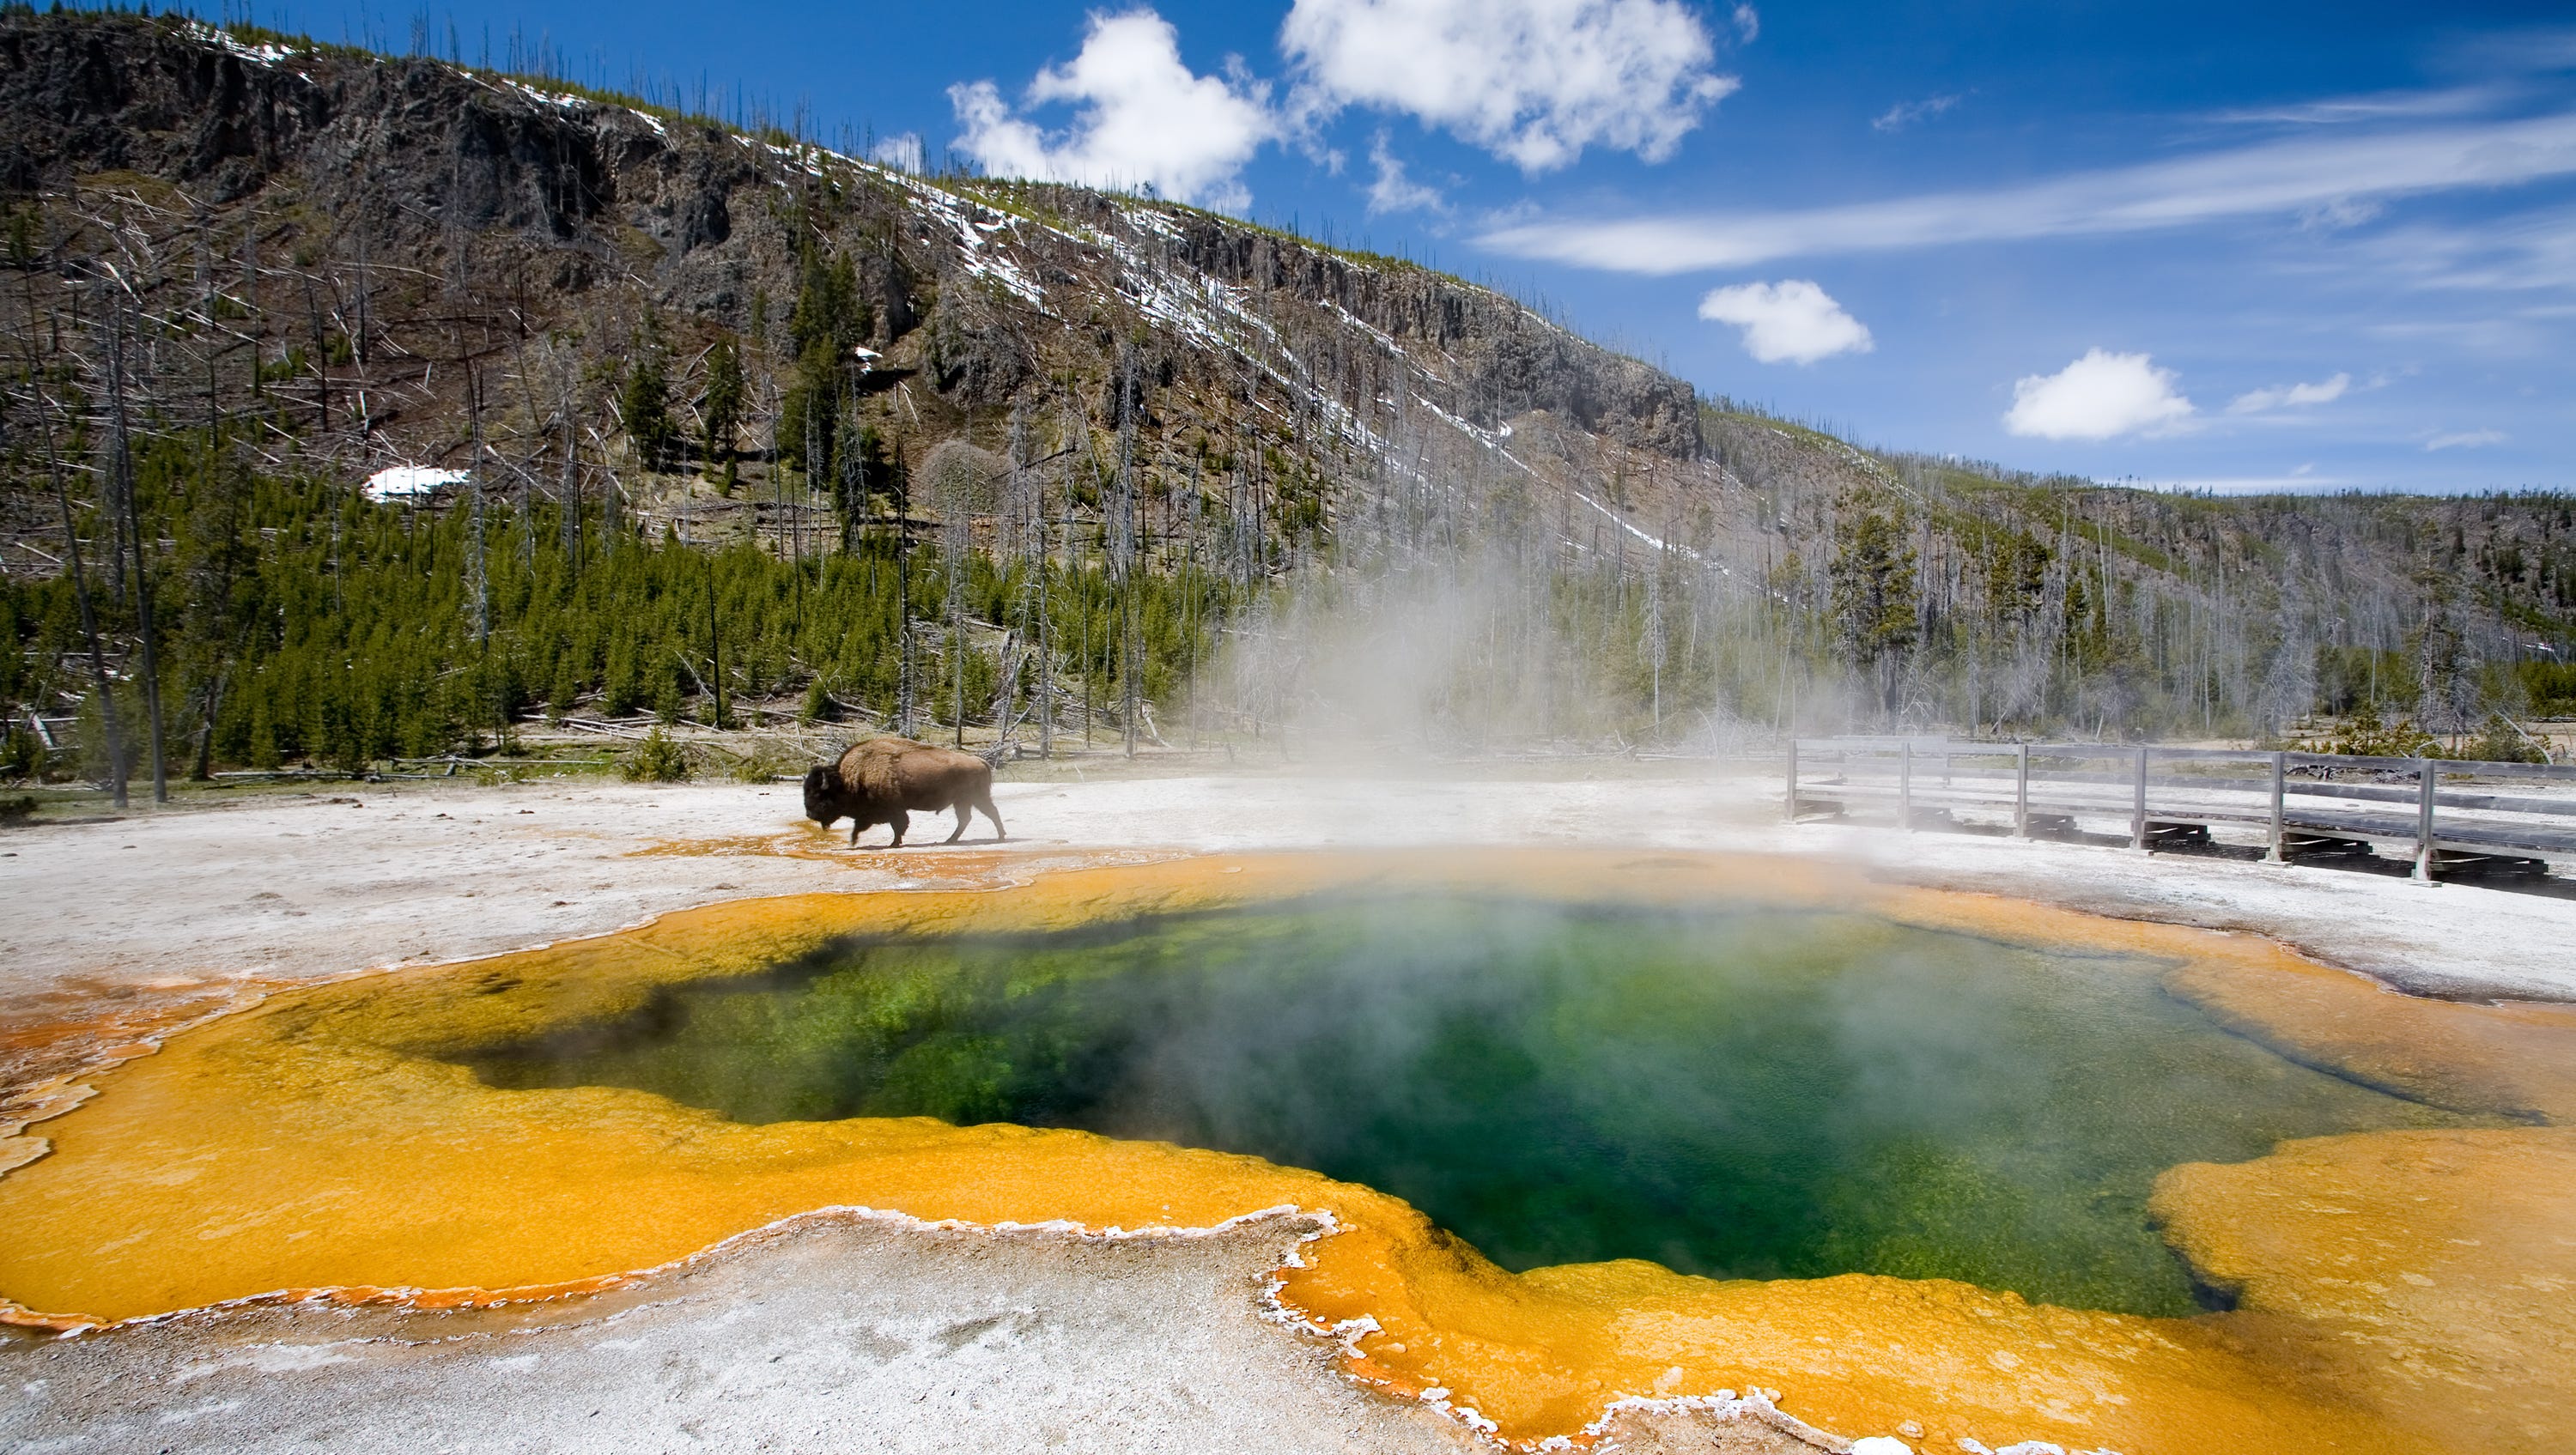 Yellowstone Super Volcano Not Ready To Erupt Yet Expert Says